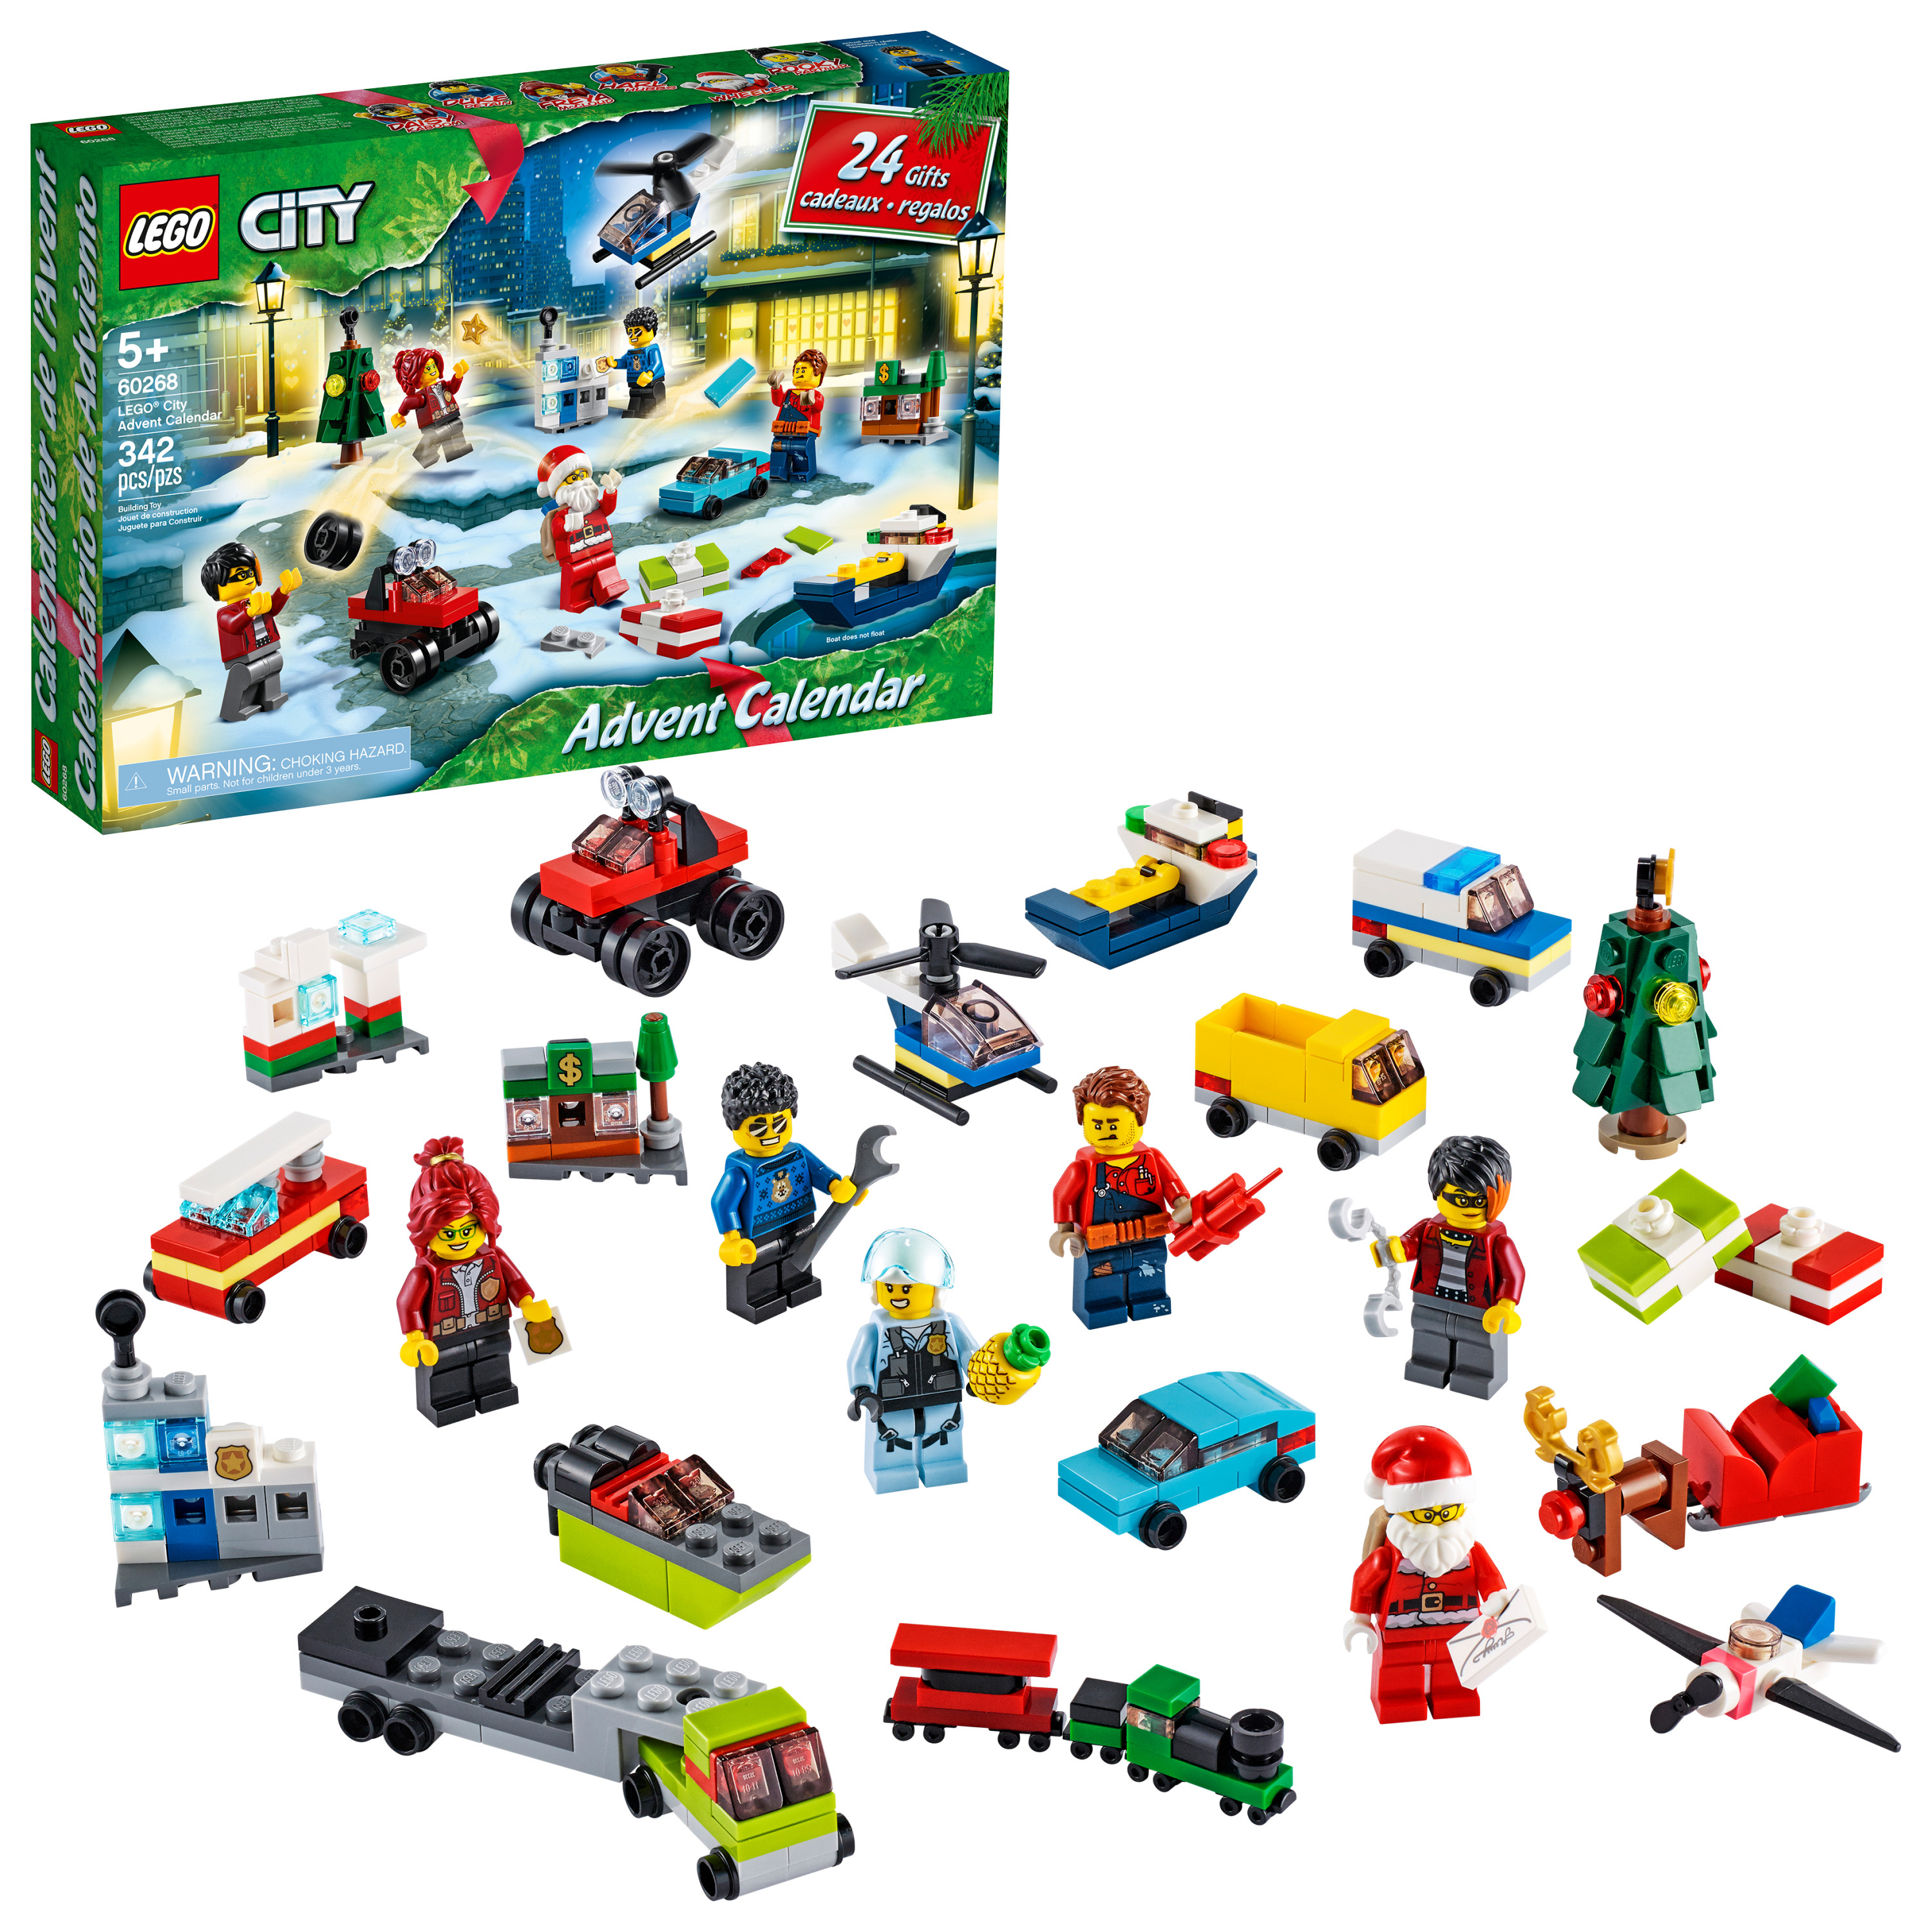 LEGO City Advent Calendar 60268, With City Play Mat, Best Festive Toys for Kids (342 Pieces) - image 1 of 7